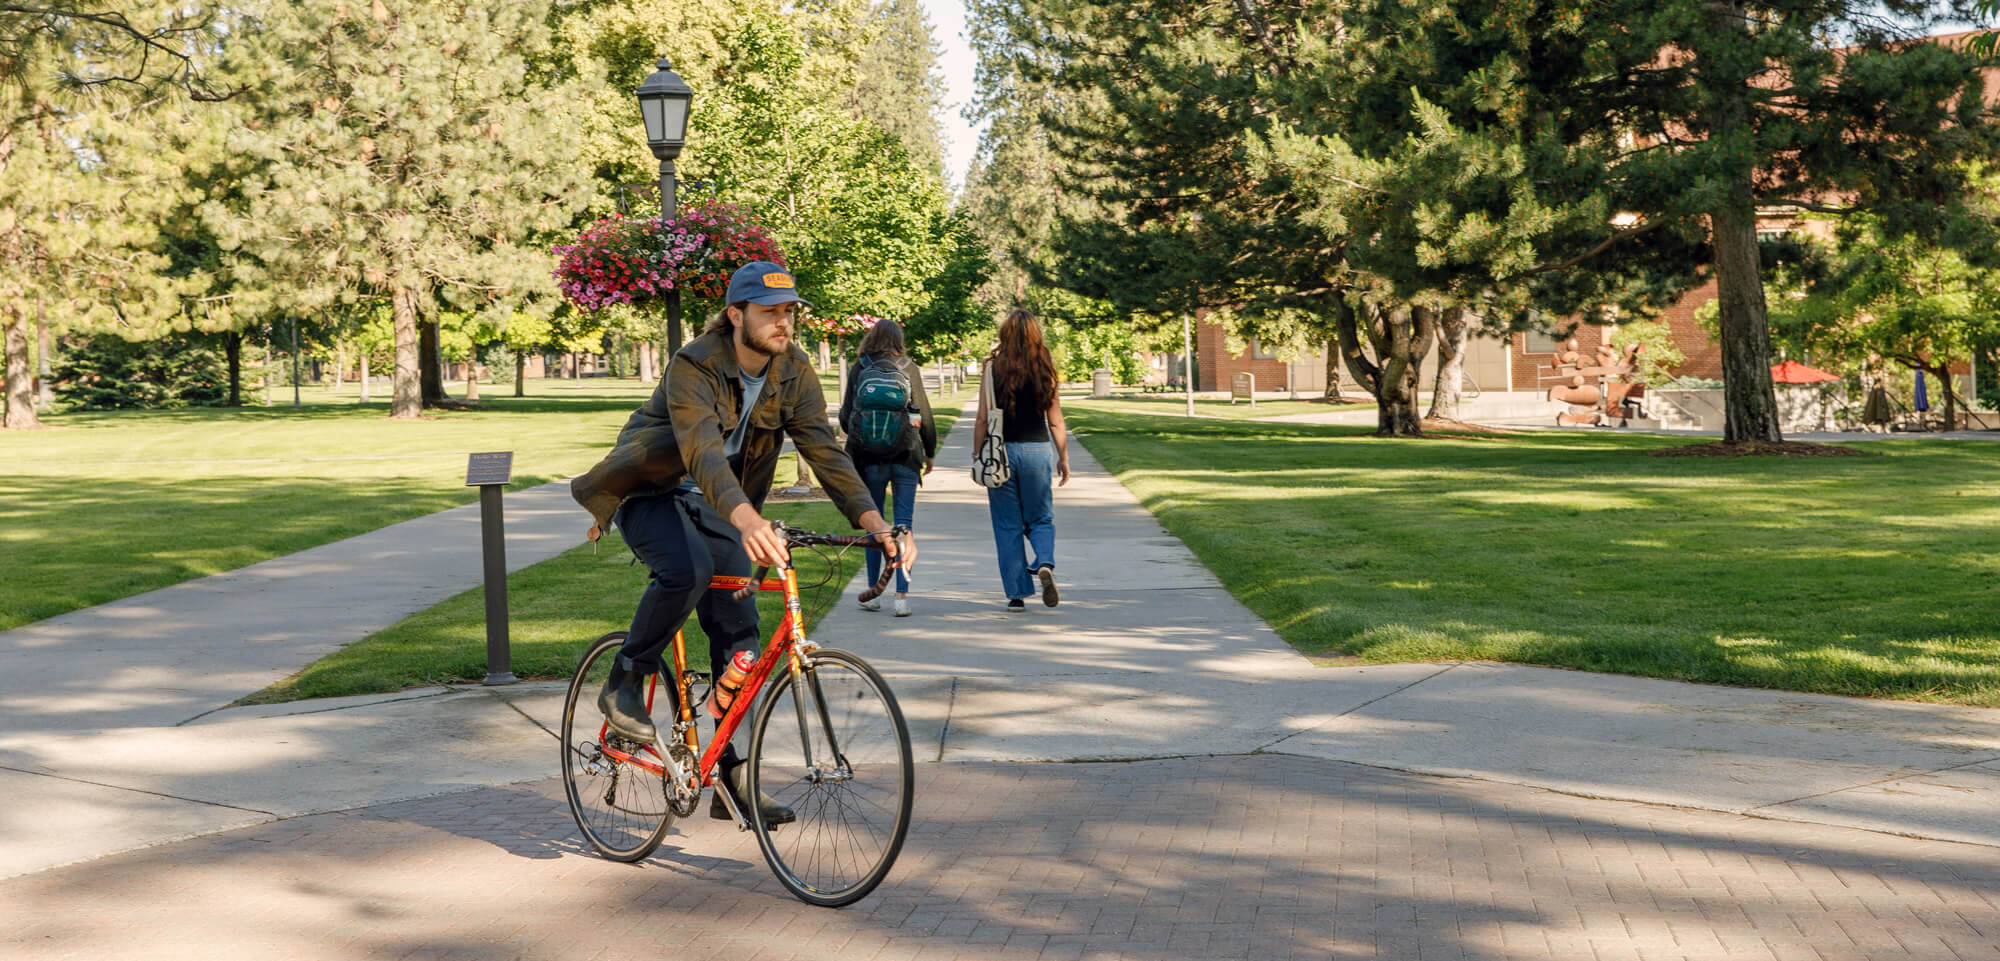 A student rides a red bicycle on a paved path through manicured lawns and evergreen trees past a brick academic building.